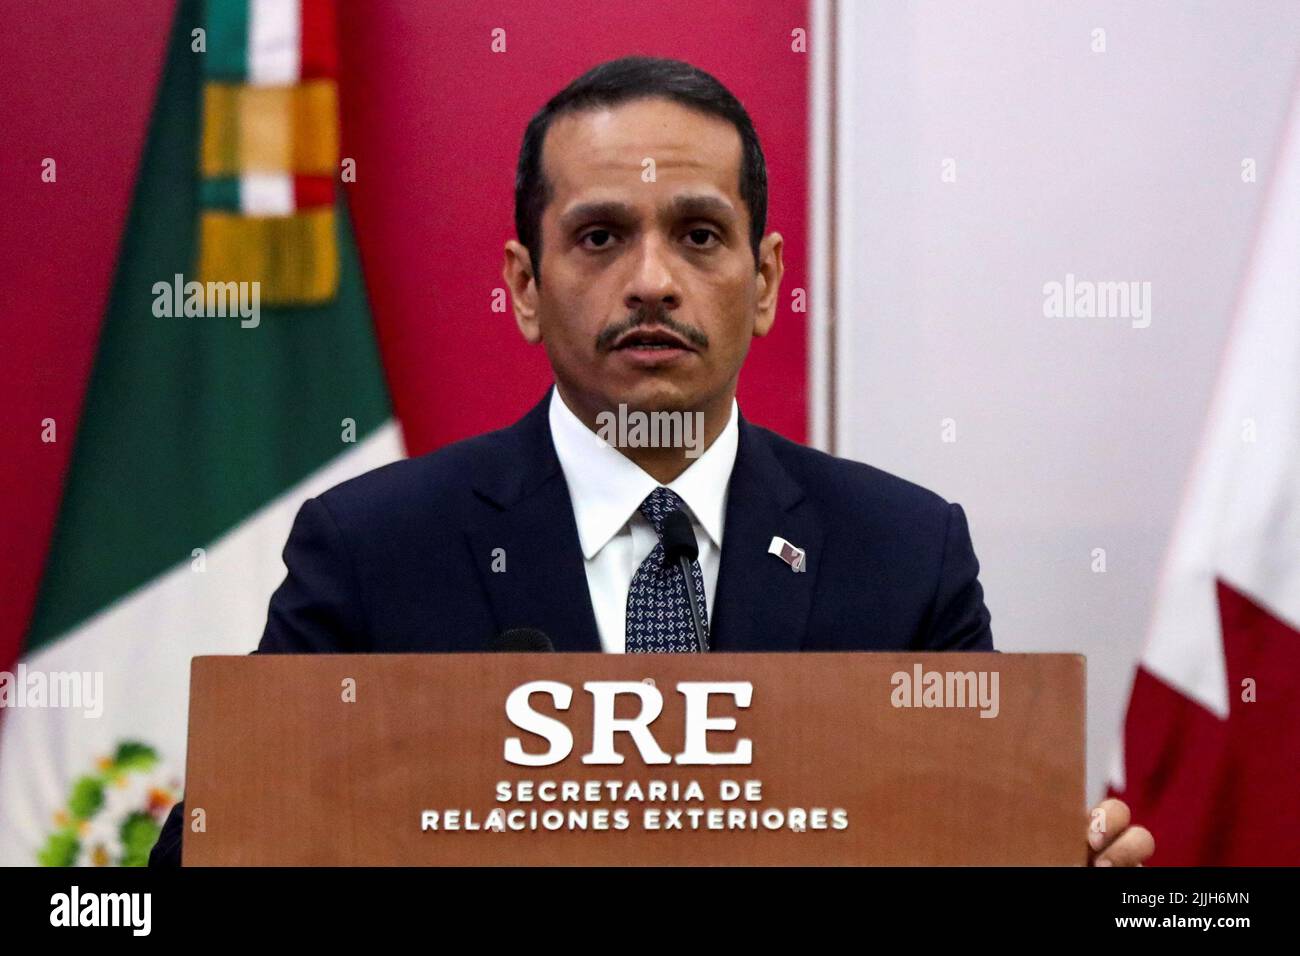 Qatar’s Foreign Minister, Mohammed bin Abdulrahman bin Jassim Al Than, address the media at the Foreign Ministry Building (SRE) in Mexico City, Mexico, July 26, 2022. REUTERS/Edgard Garrido Stock Photo